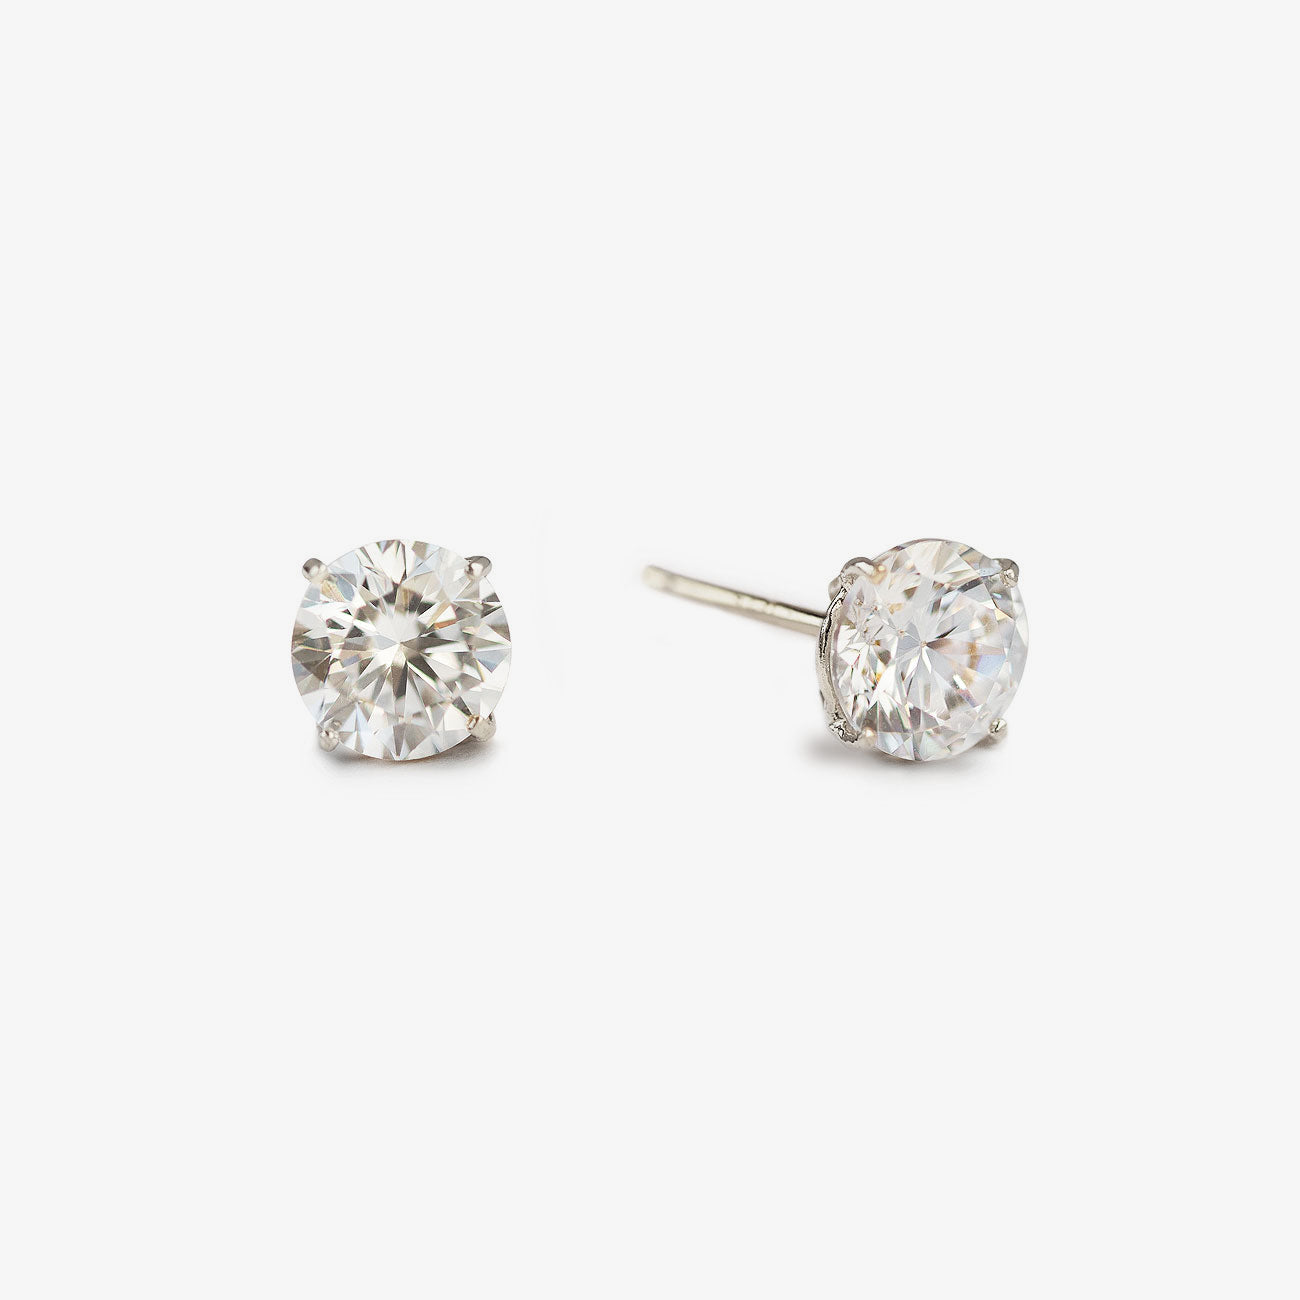 9ct white gold diamond and sapphire stud earrings